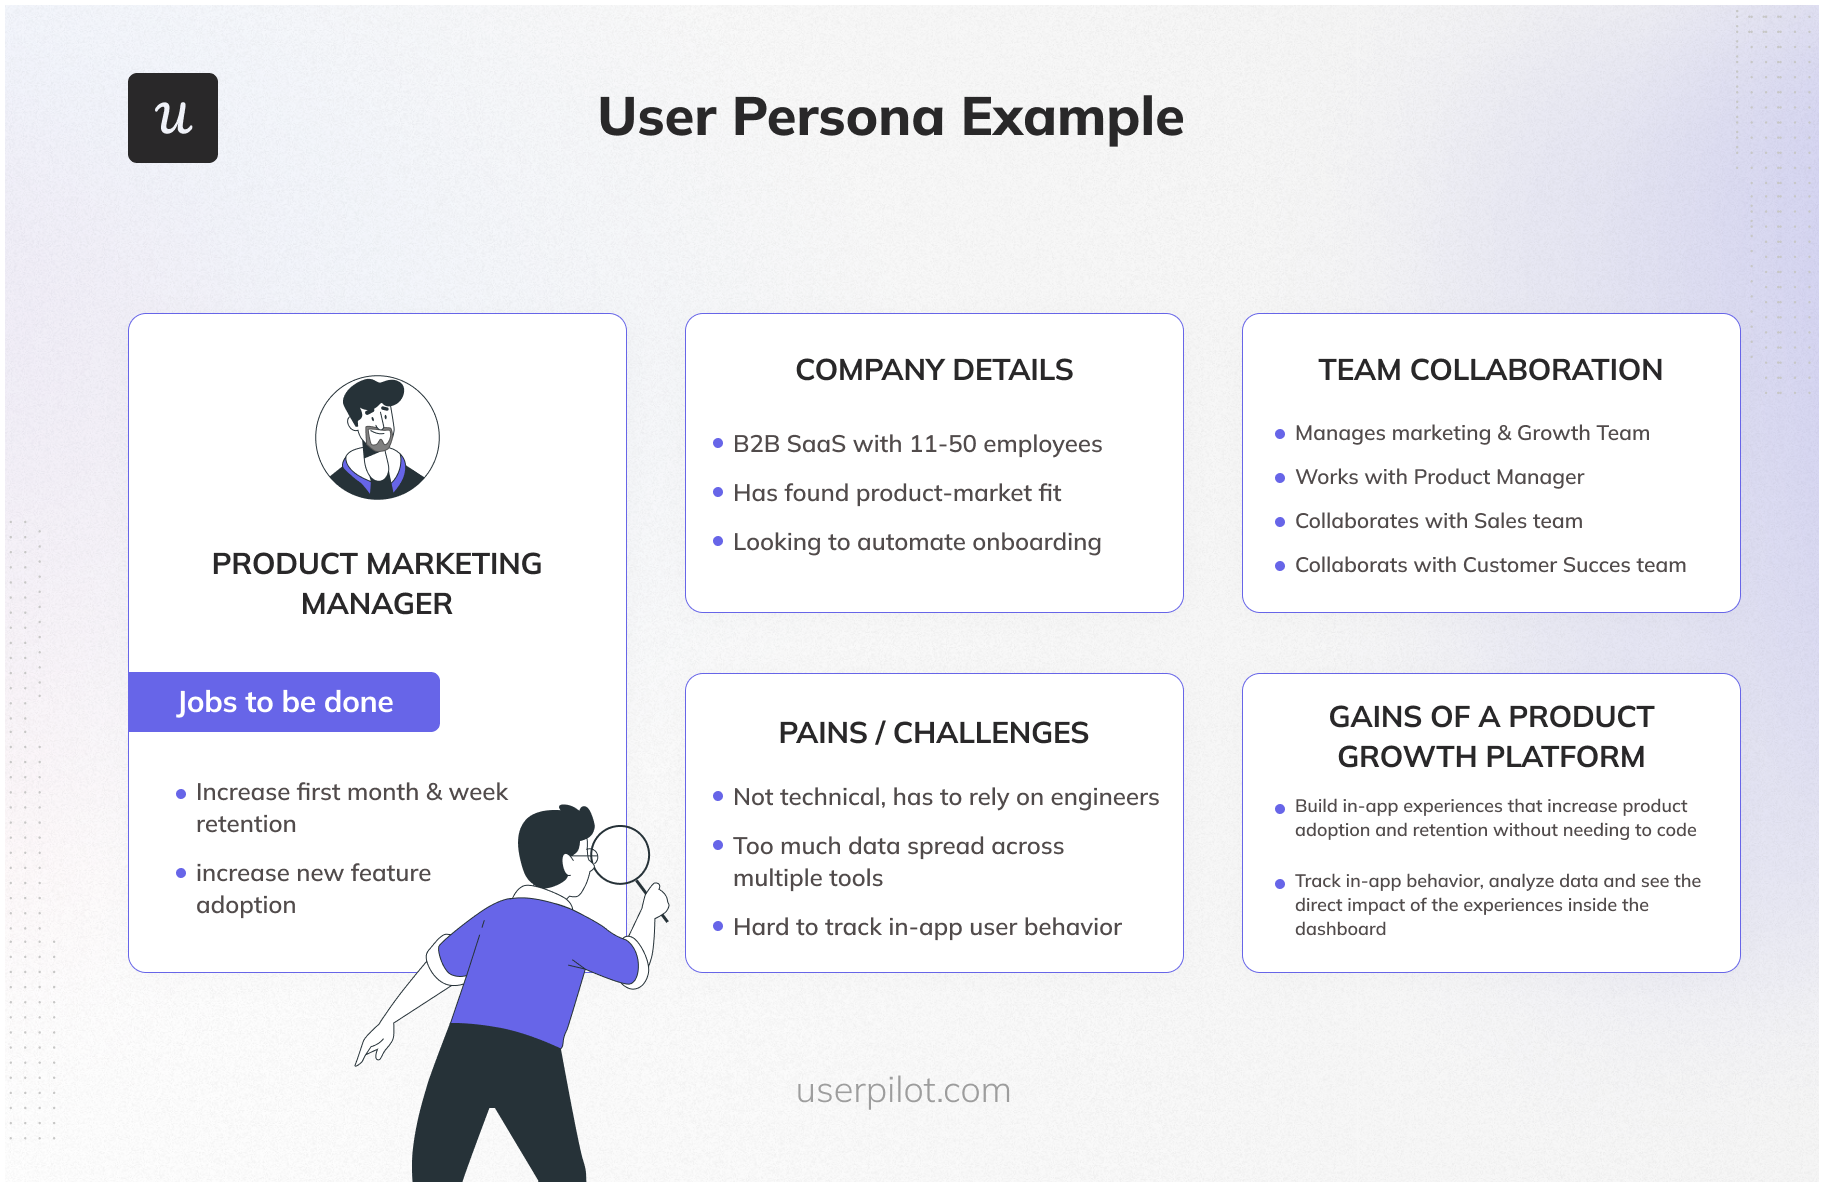 A user persona example.